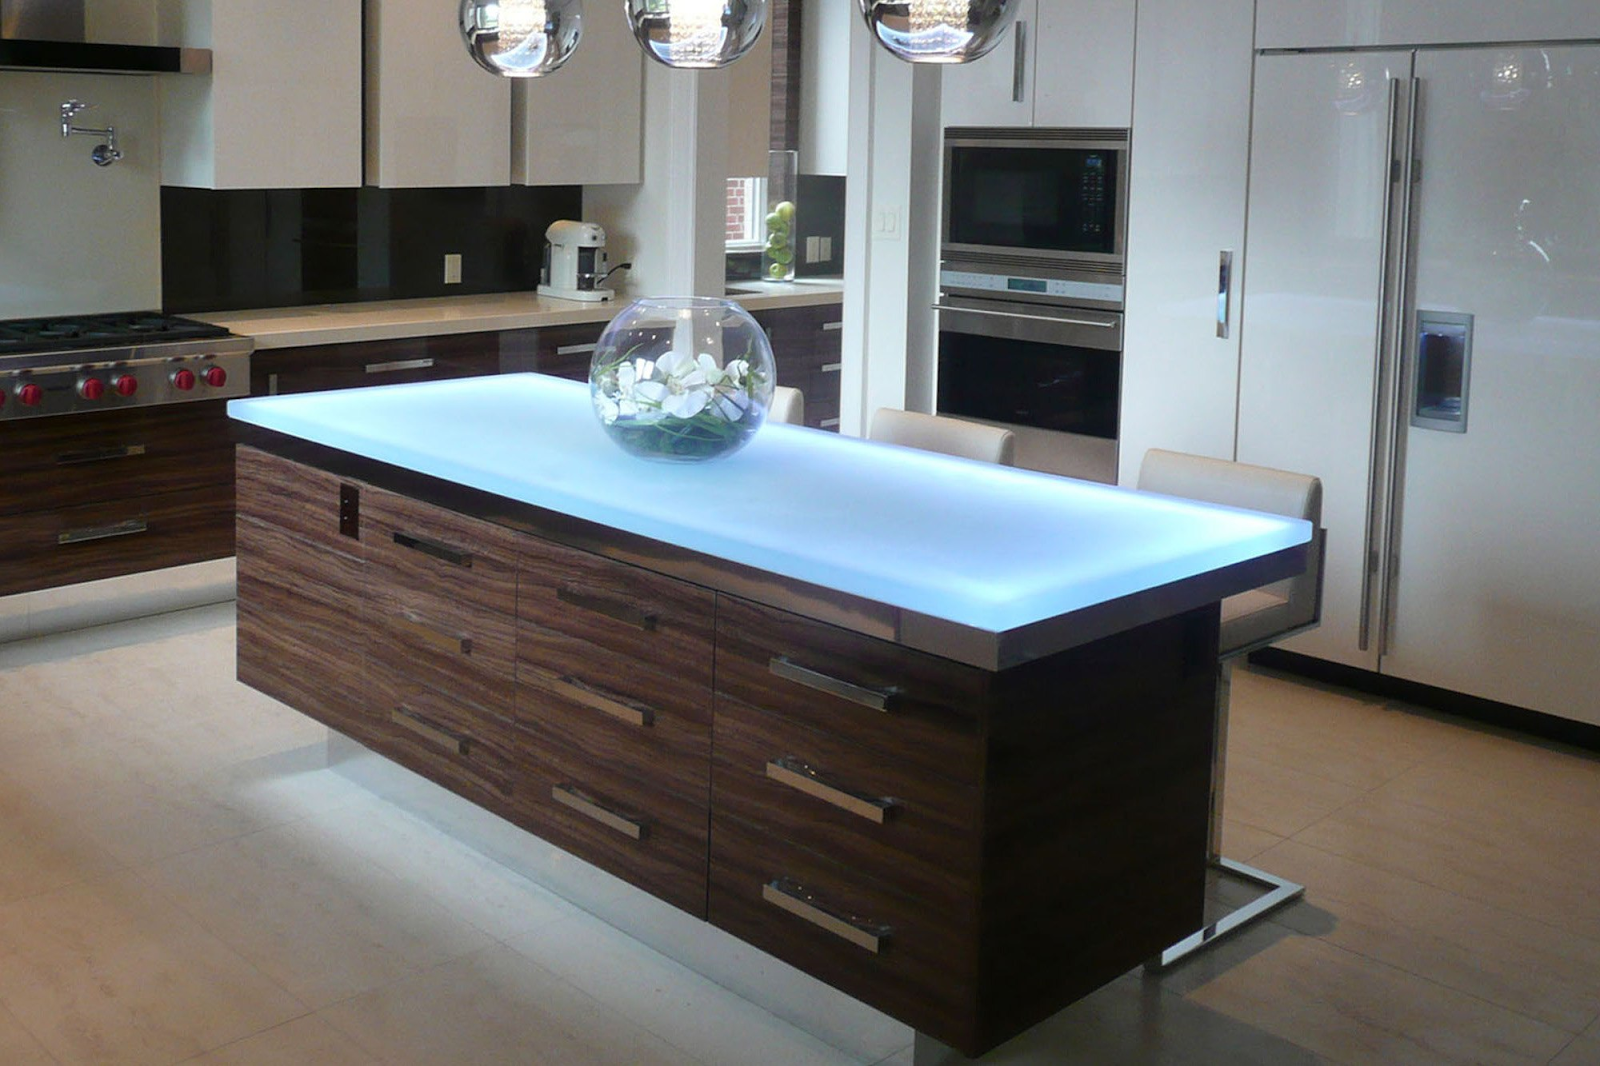 glass kitchen countertop with wooden cabinets